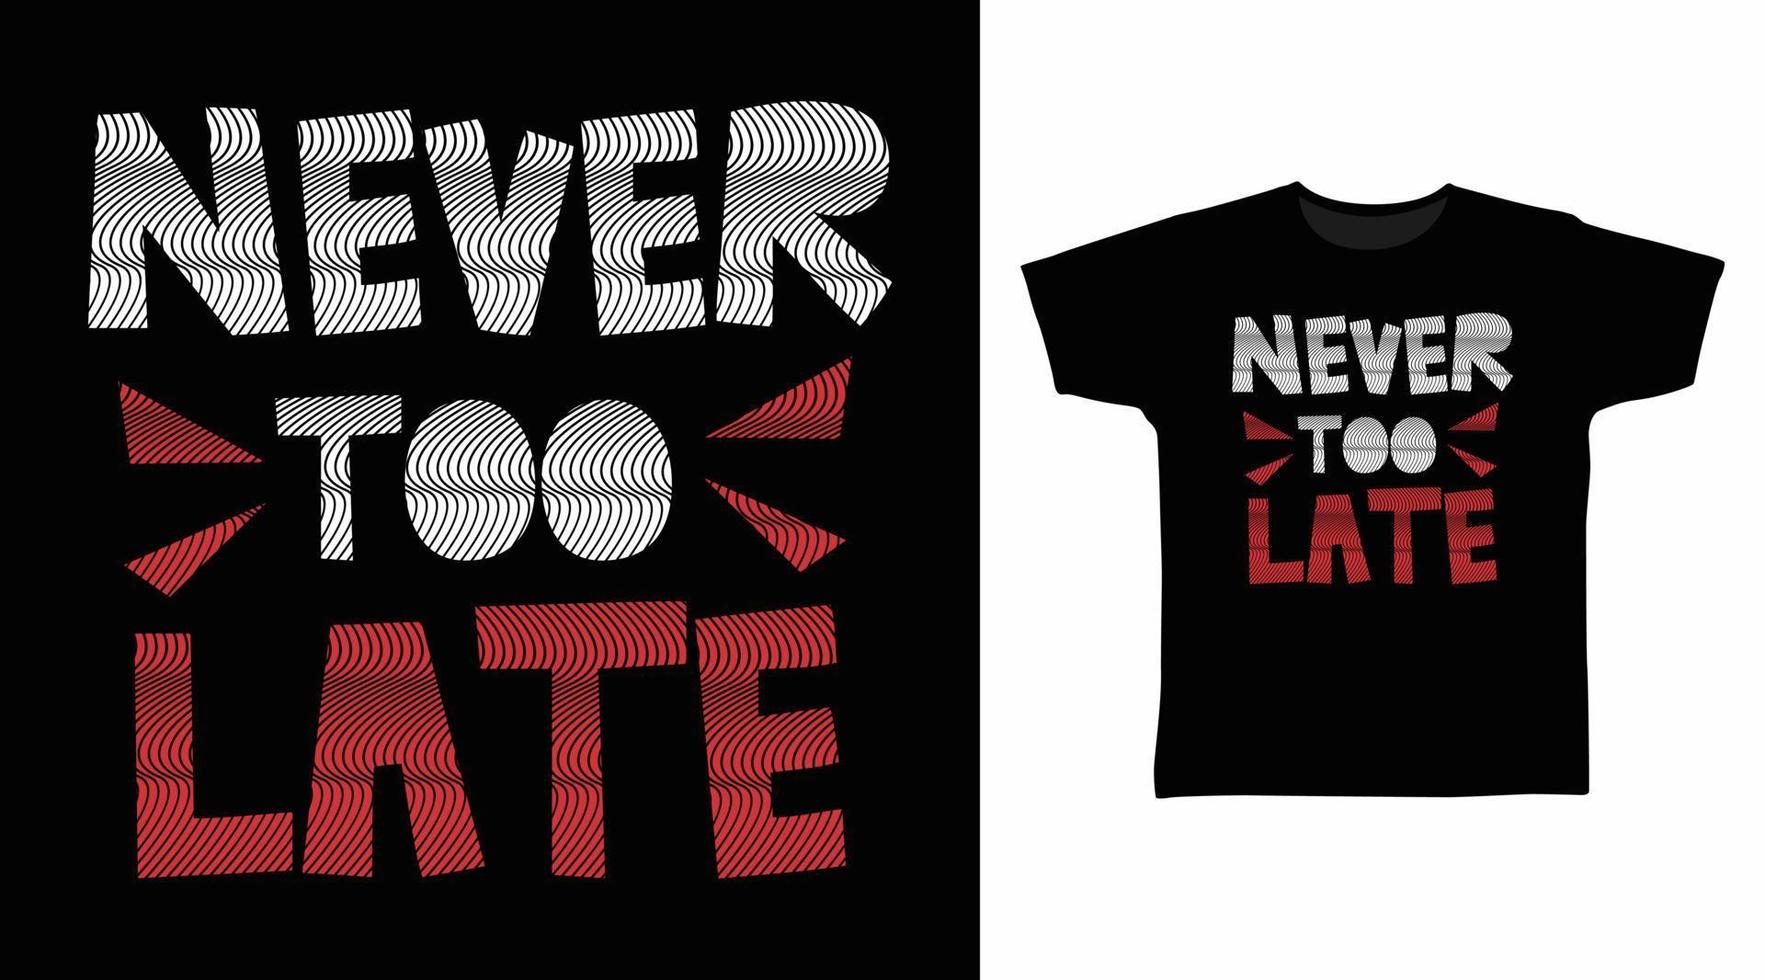 Never too late typography quotes design vector illustration ready for print on t-shirt